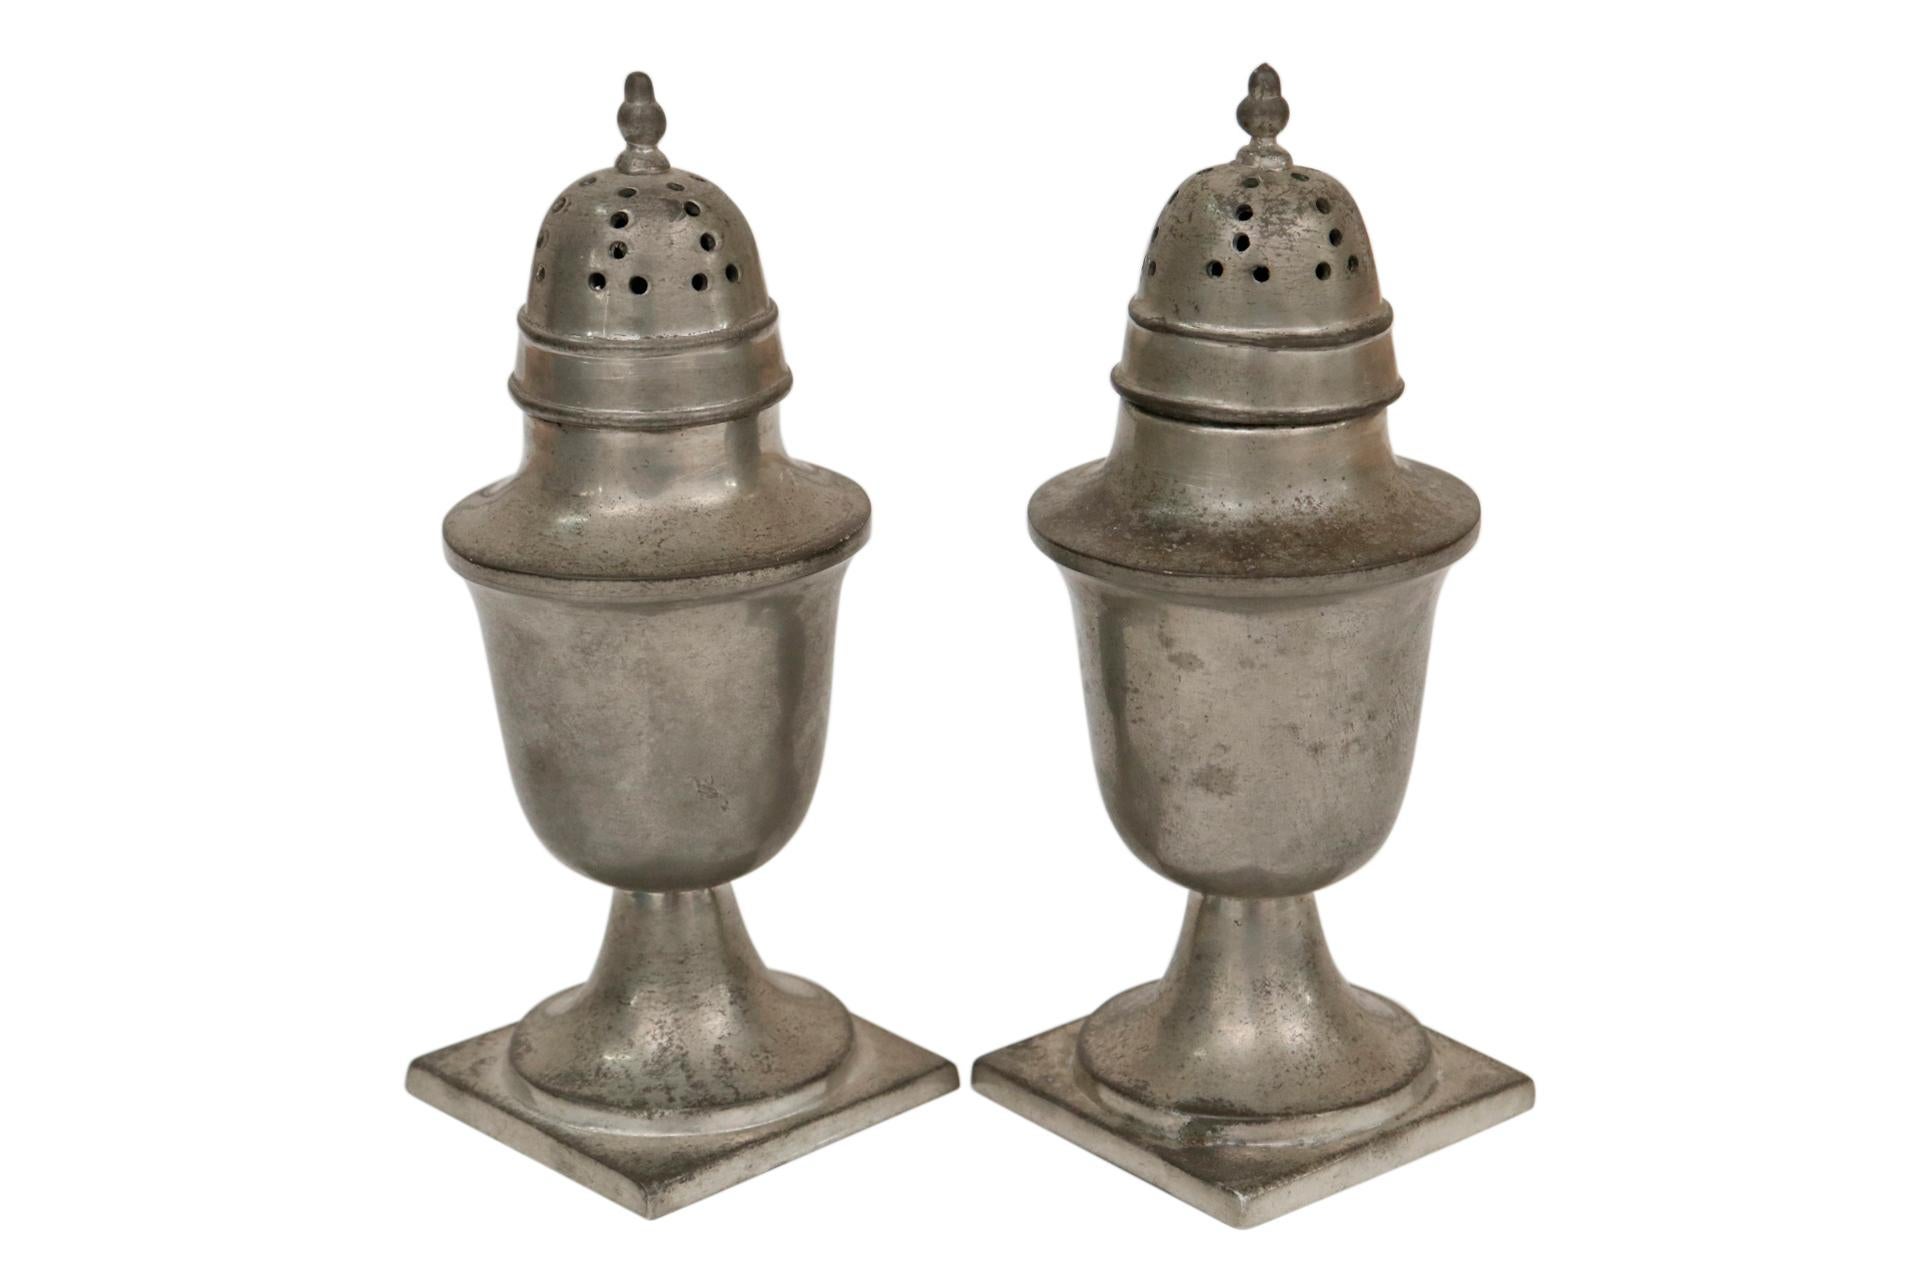 A pair of Colonial style Williamsburg Reproduction salt and pepper shakers. Manufactured by Steiff in the early 1960’s of lead free pewter. Traditional tall urns have finial topped pierced lids and square bases. Marked underneath. Dimensions per